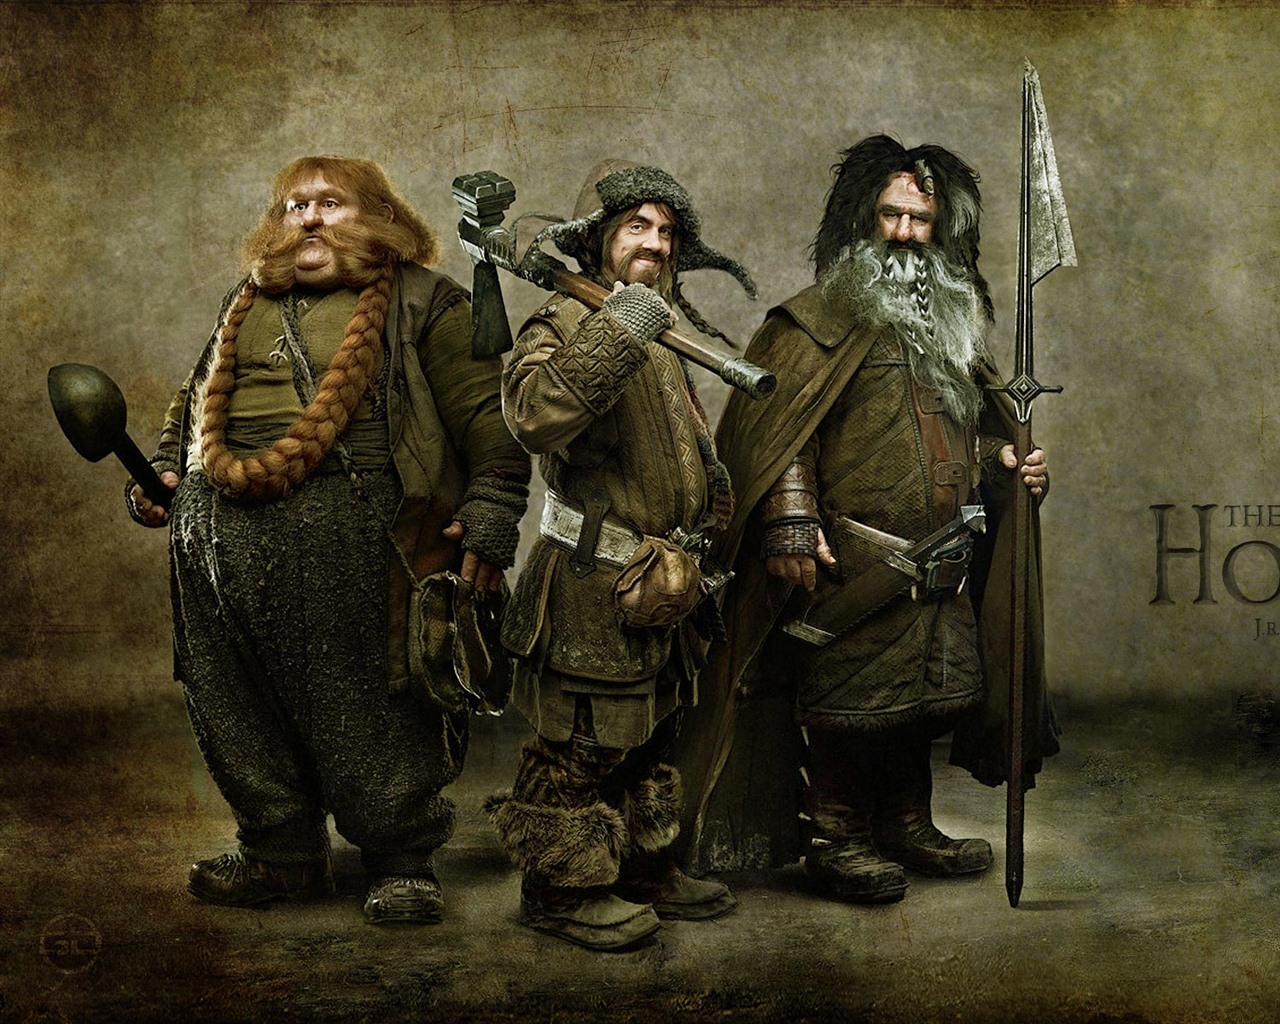 The Hobbit: An Unexpected Journey HD wallpapers #5 - 1280x1024